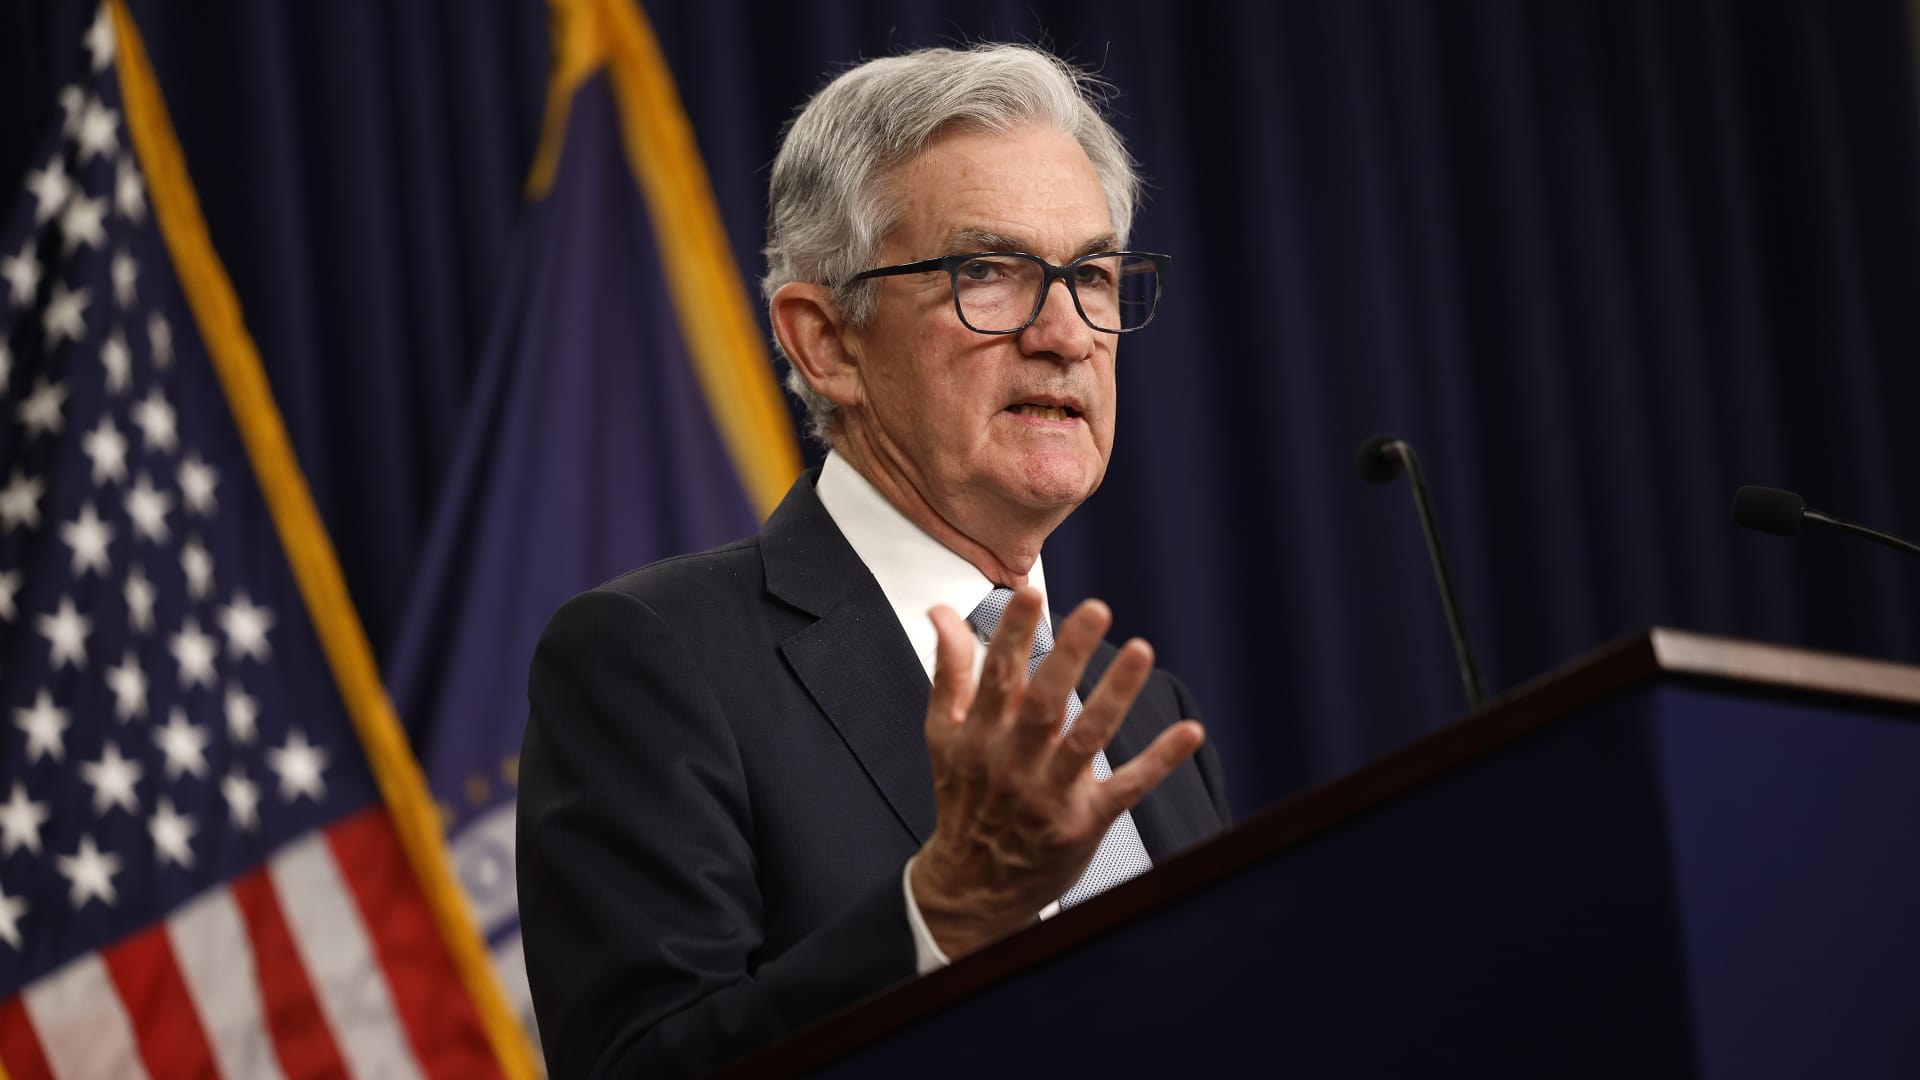 The Fed projects raising rates as high as 5.1% before ending inflation battle